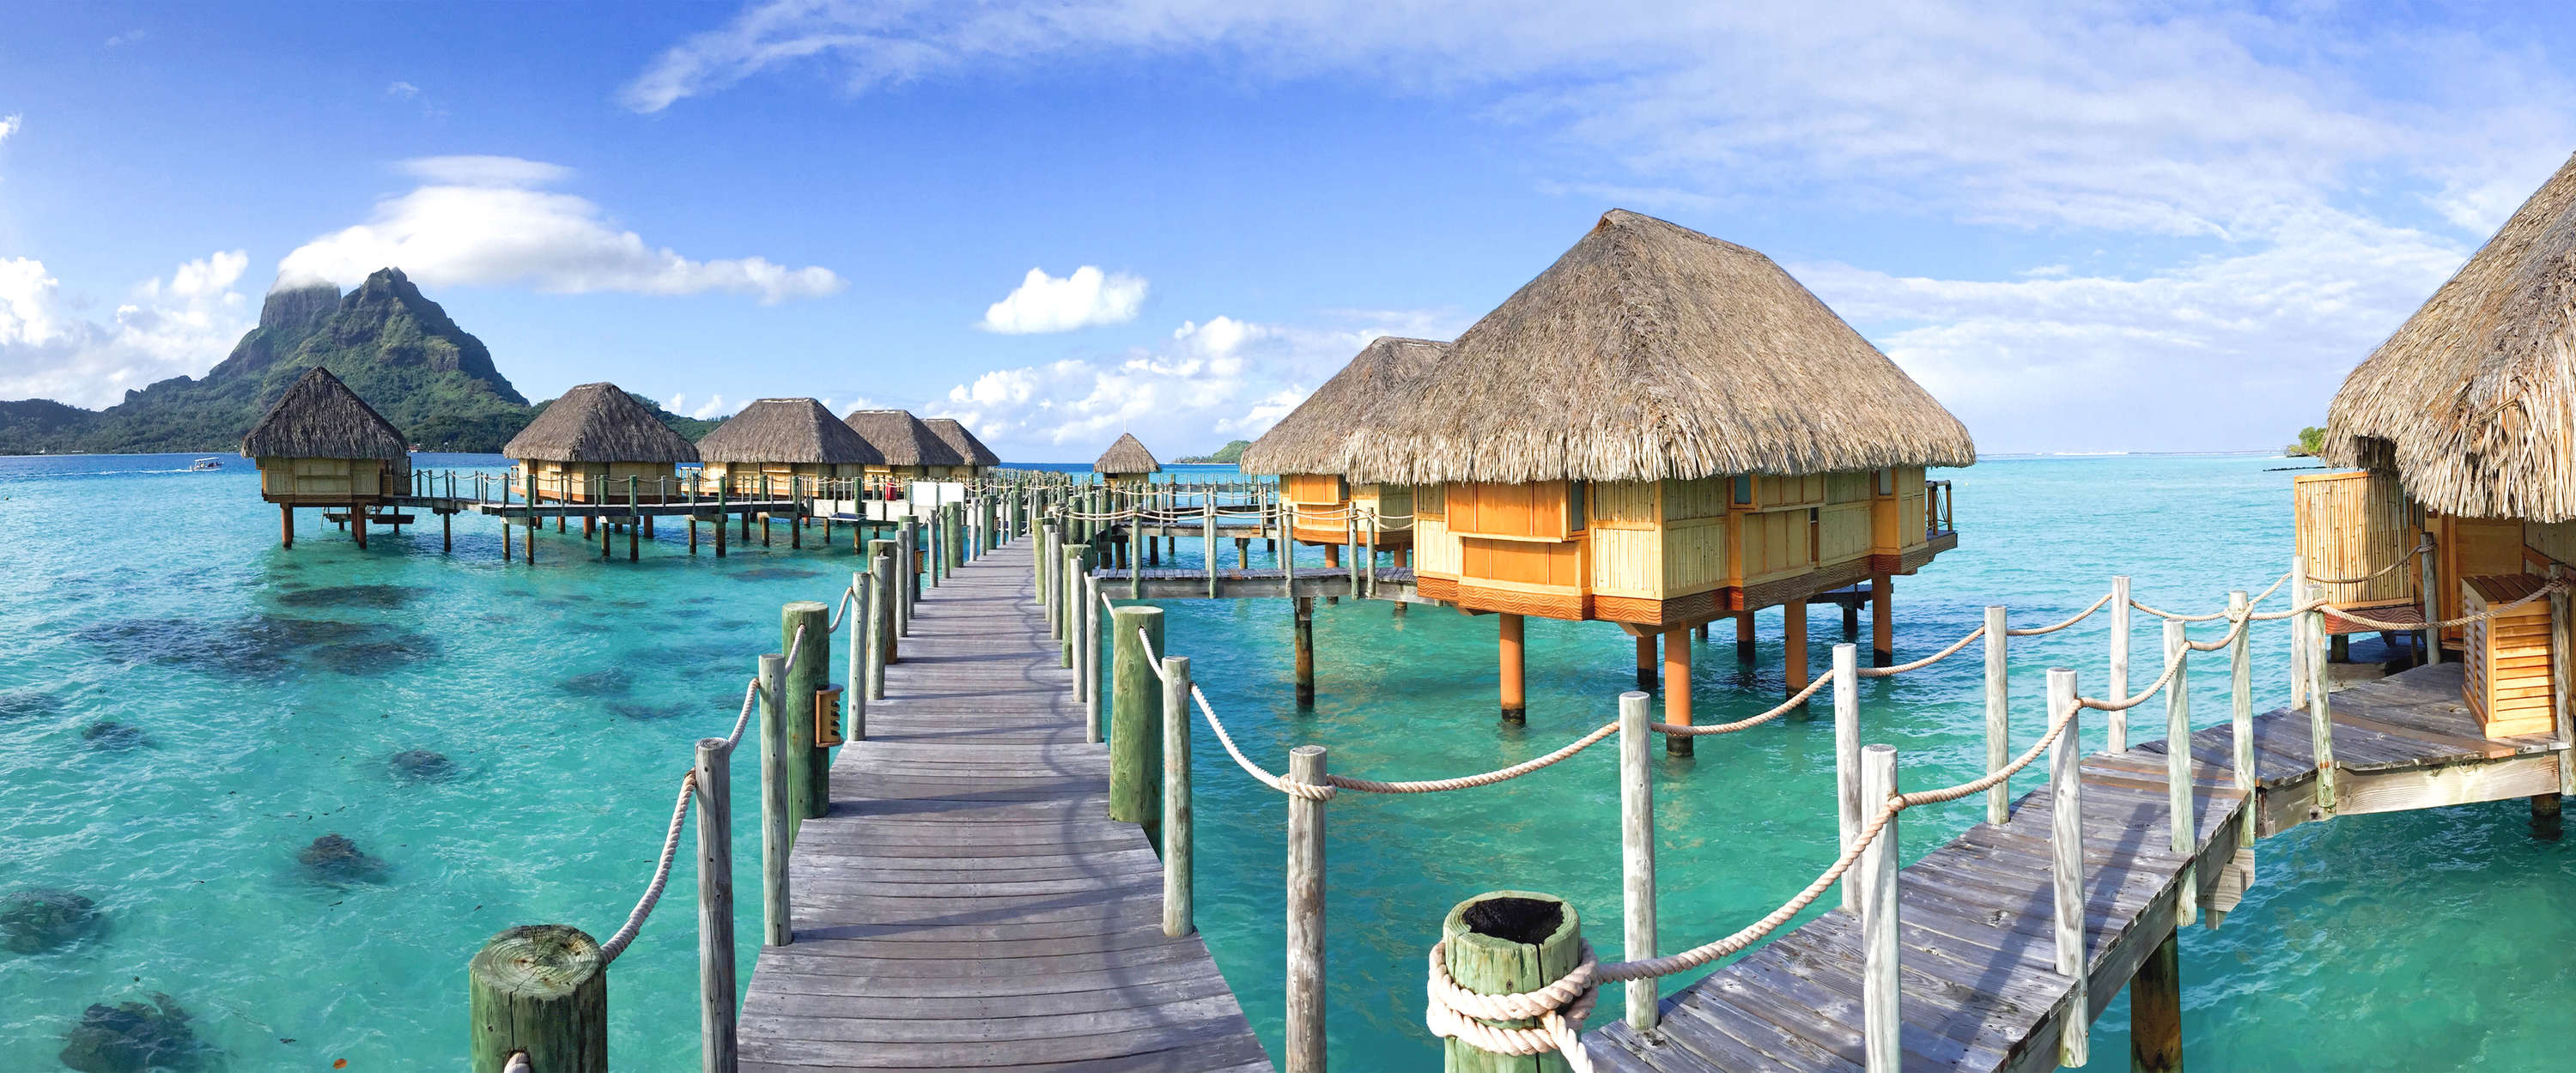             Exotic photo wallpaper Thaiti bungalows in the water
        